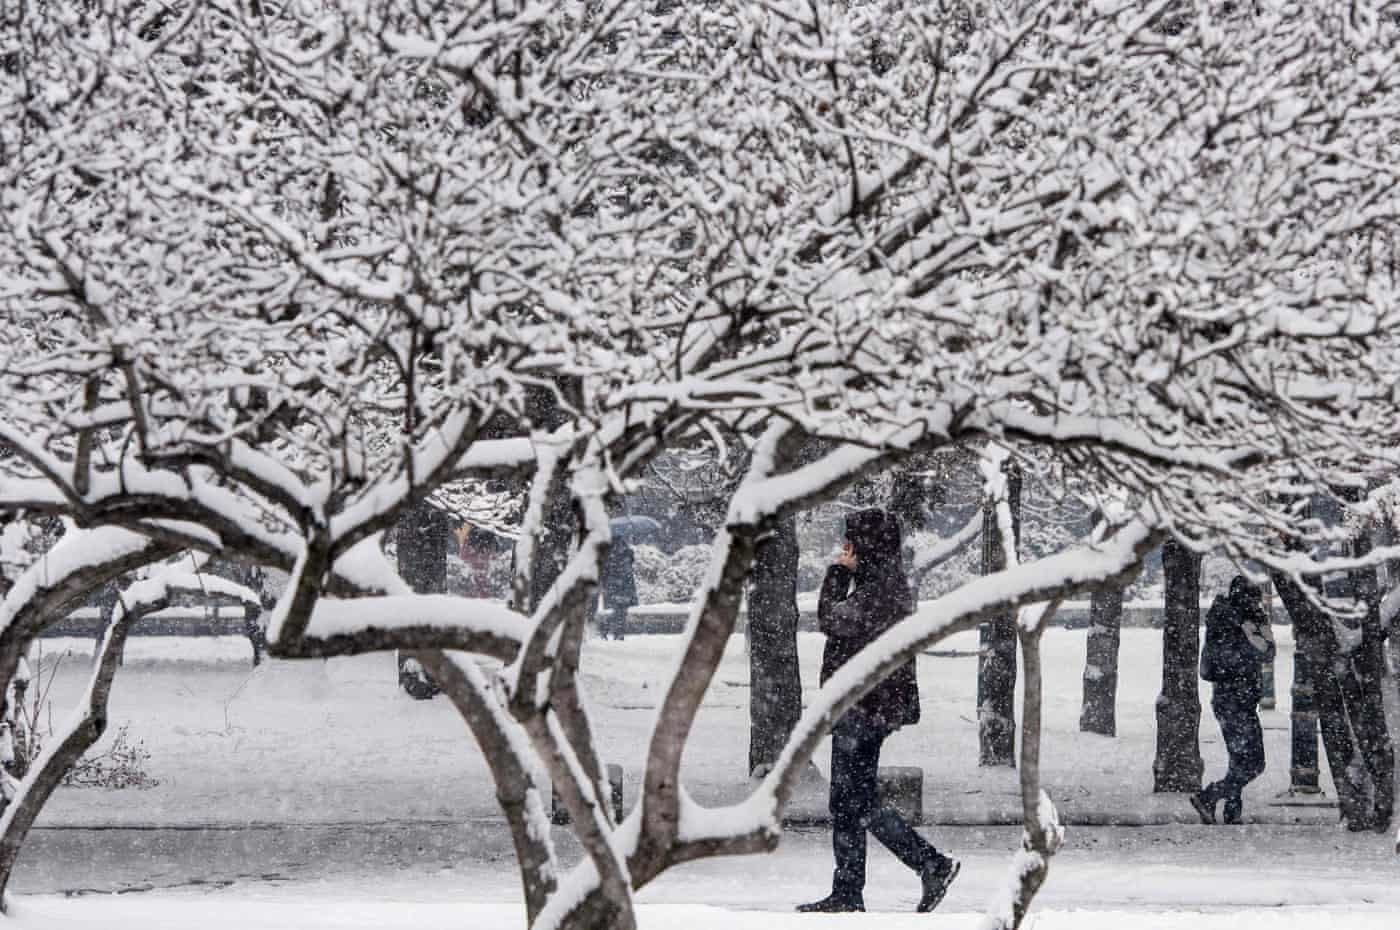 A man walks on a snow covered street during heavy snowfall in Skopje, Macedonia.